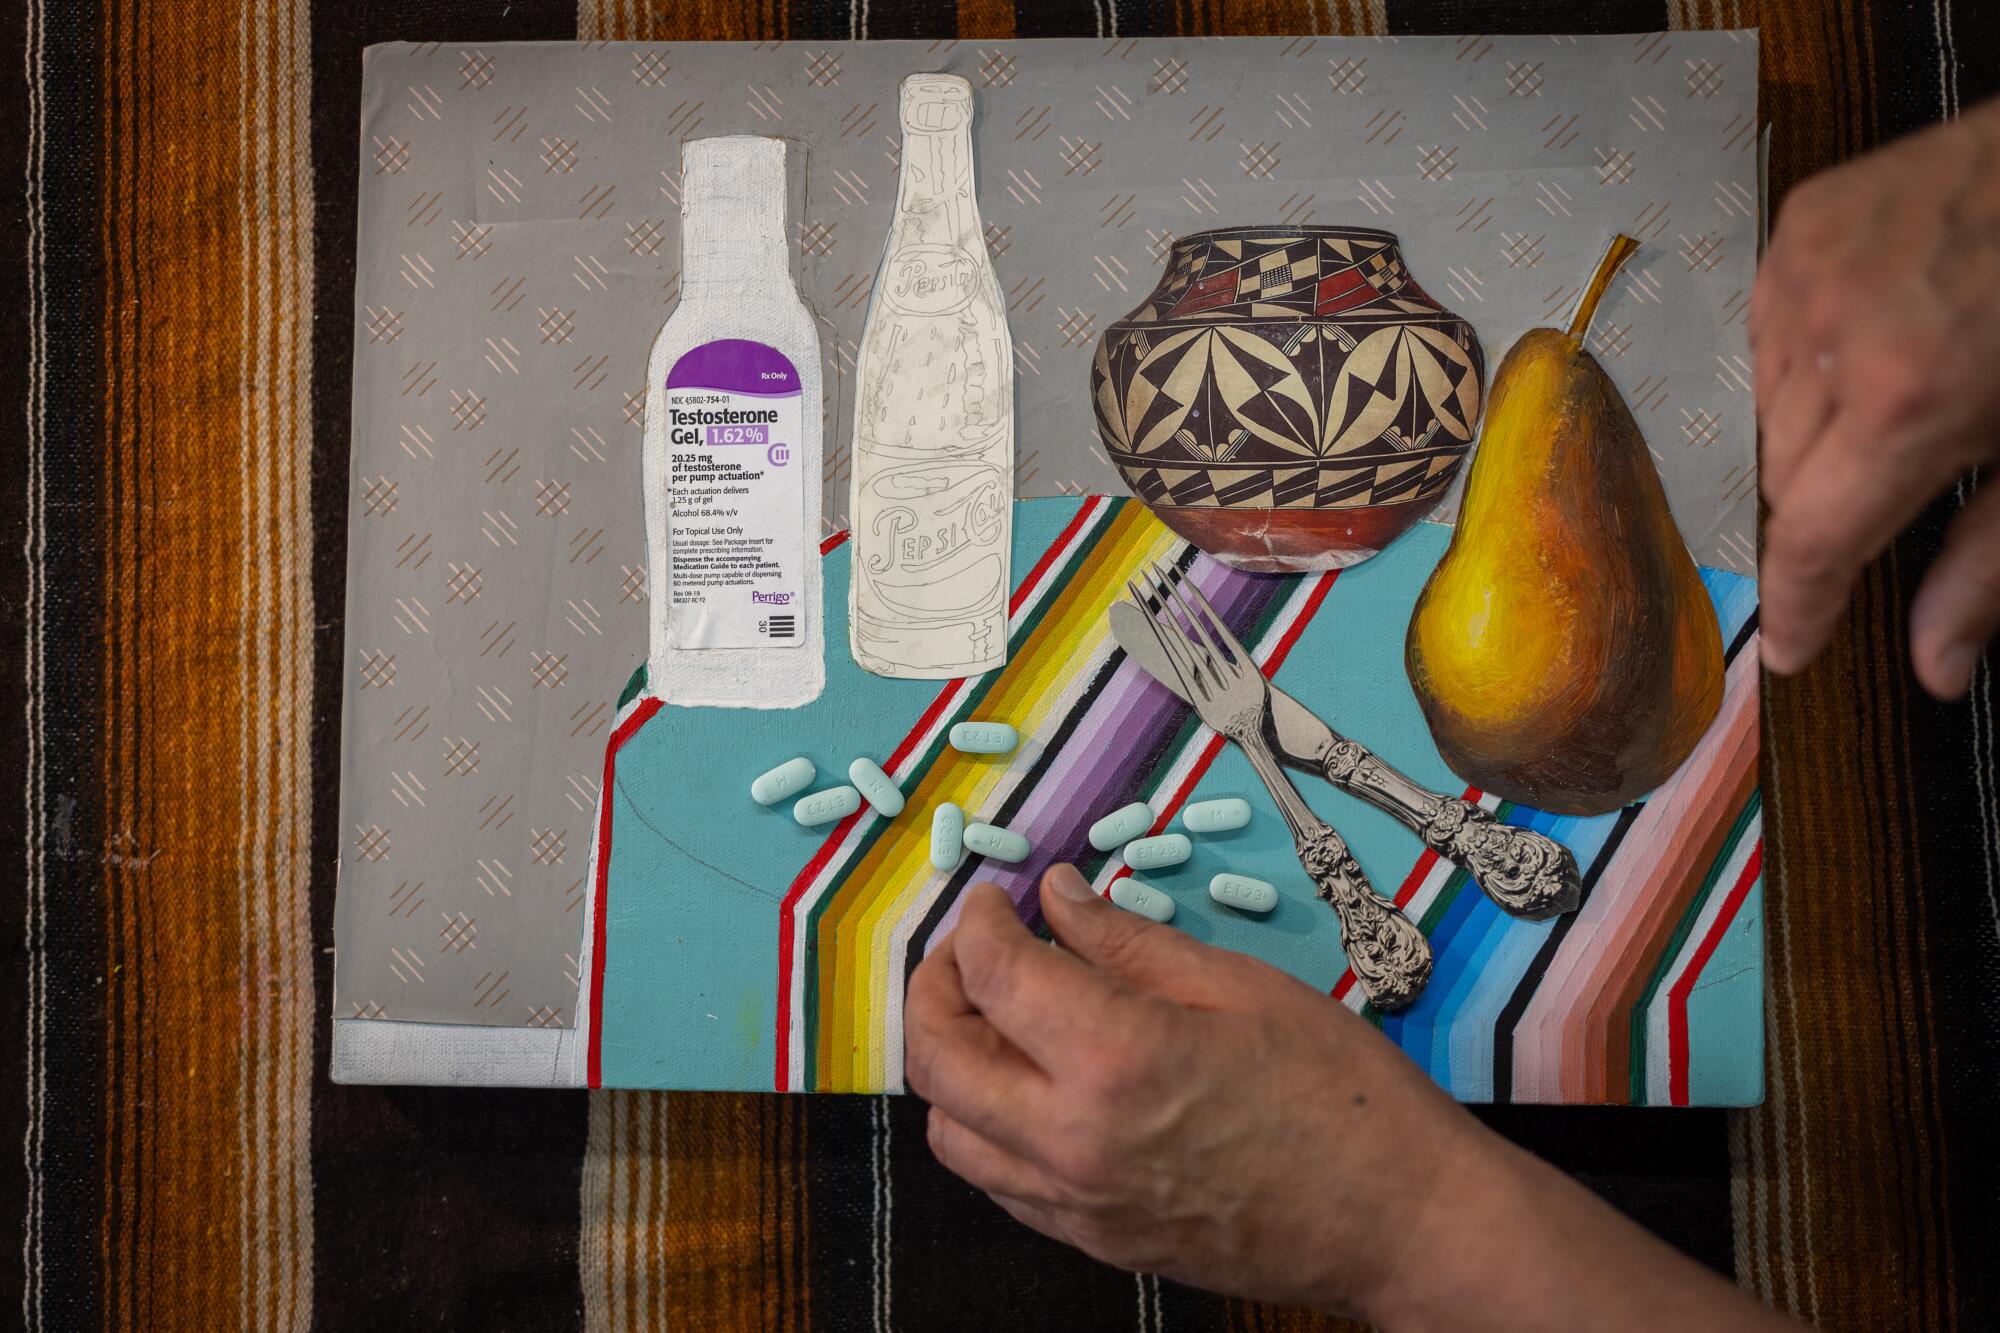 A hand arranges pills on a canvas that shows a table covered in a bright serape and drawings of HIV medication bottles.